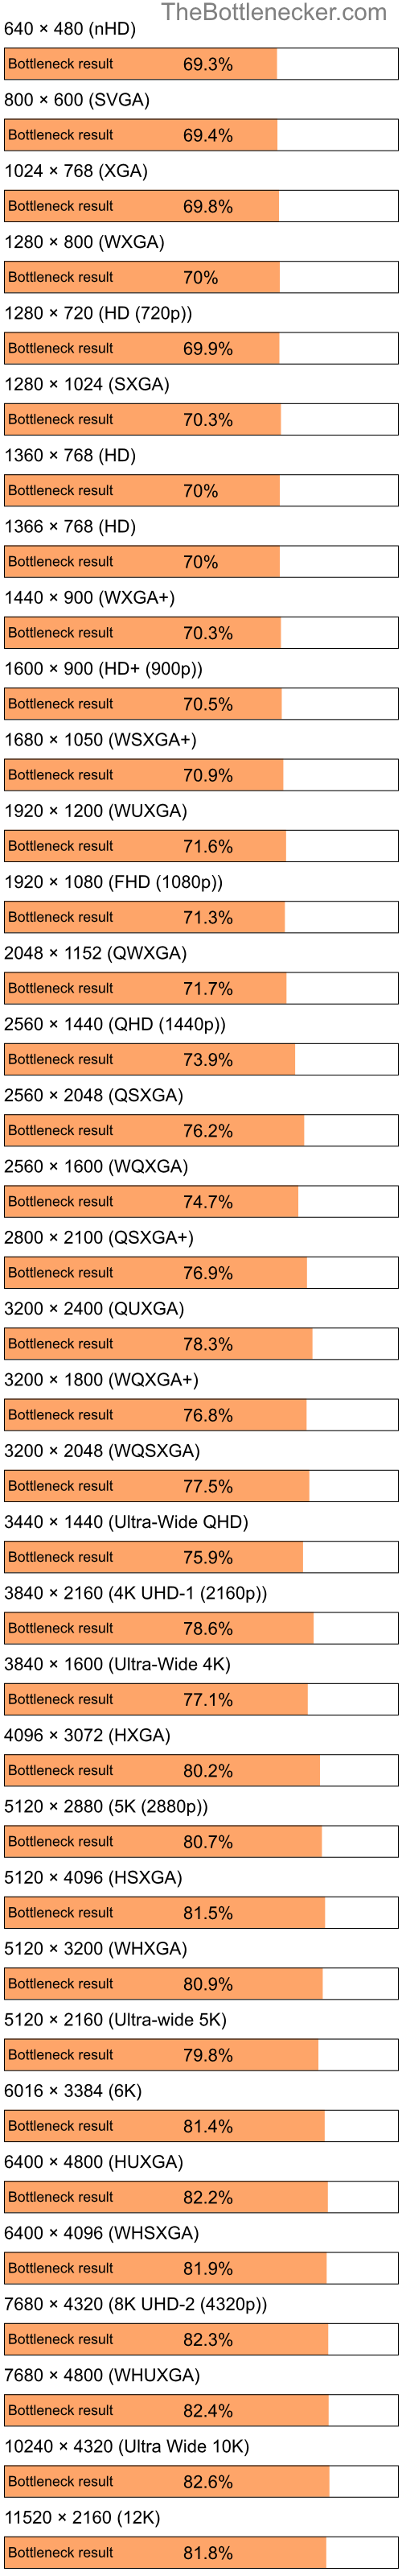 Bottleneck results by resolution for Intel Celeron M 410 and NVIDIA GeForce 8300 in Graphic Card Intense Tasks